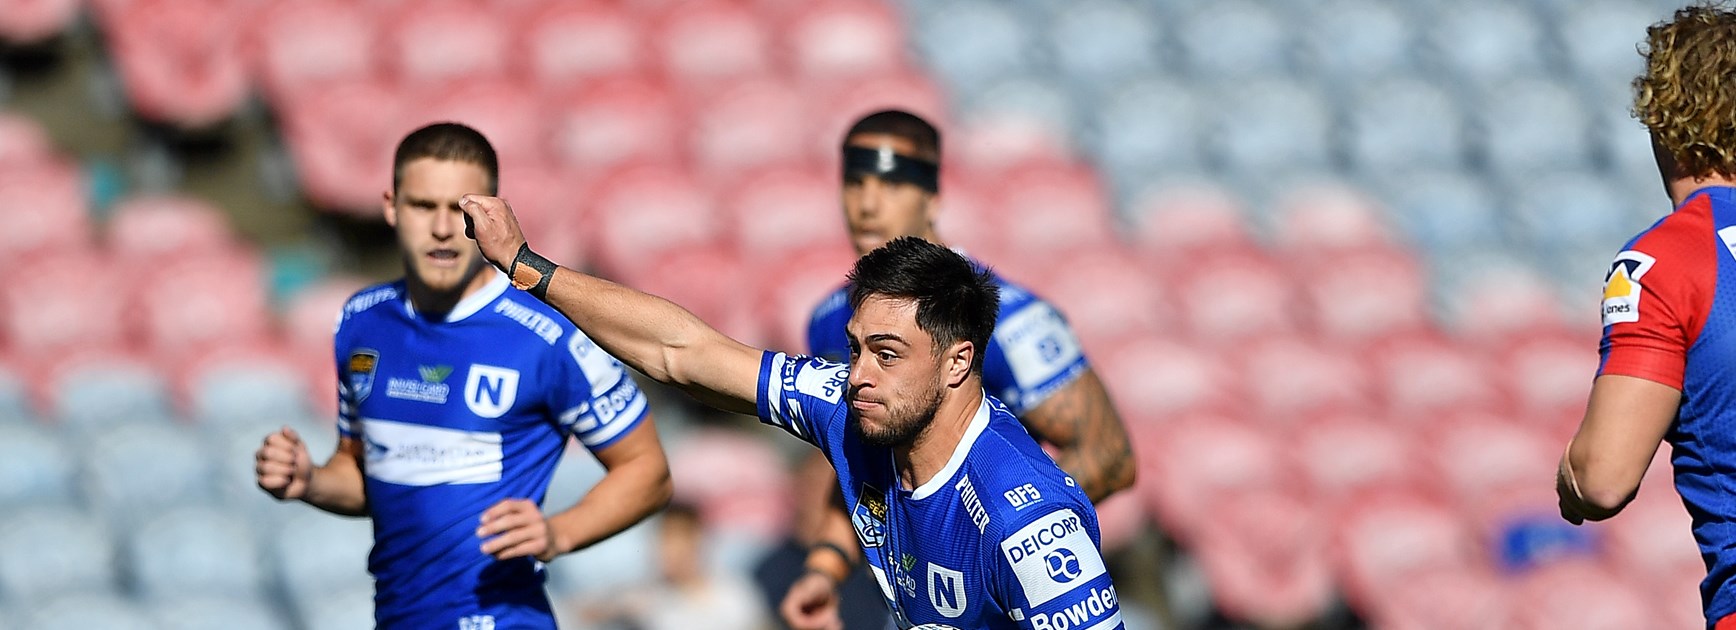 NSWRL TV Preview | Jets banking on home ground advantage